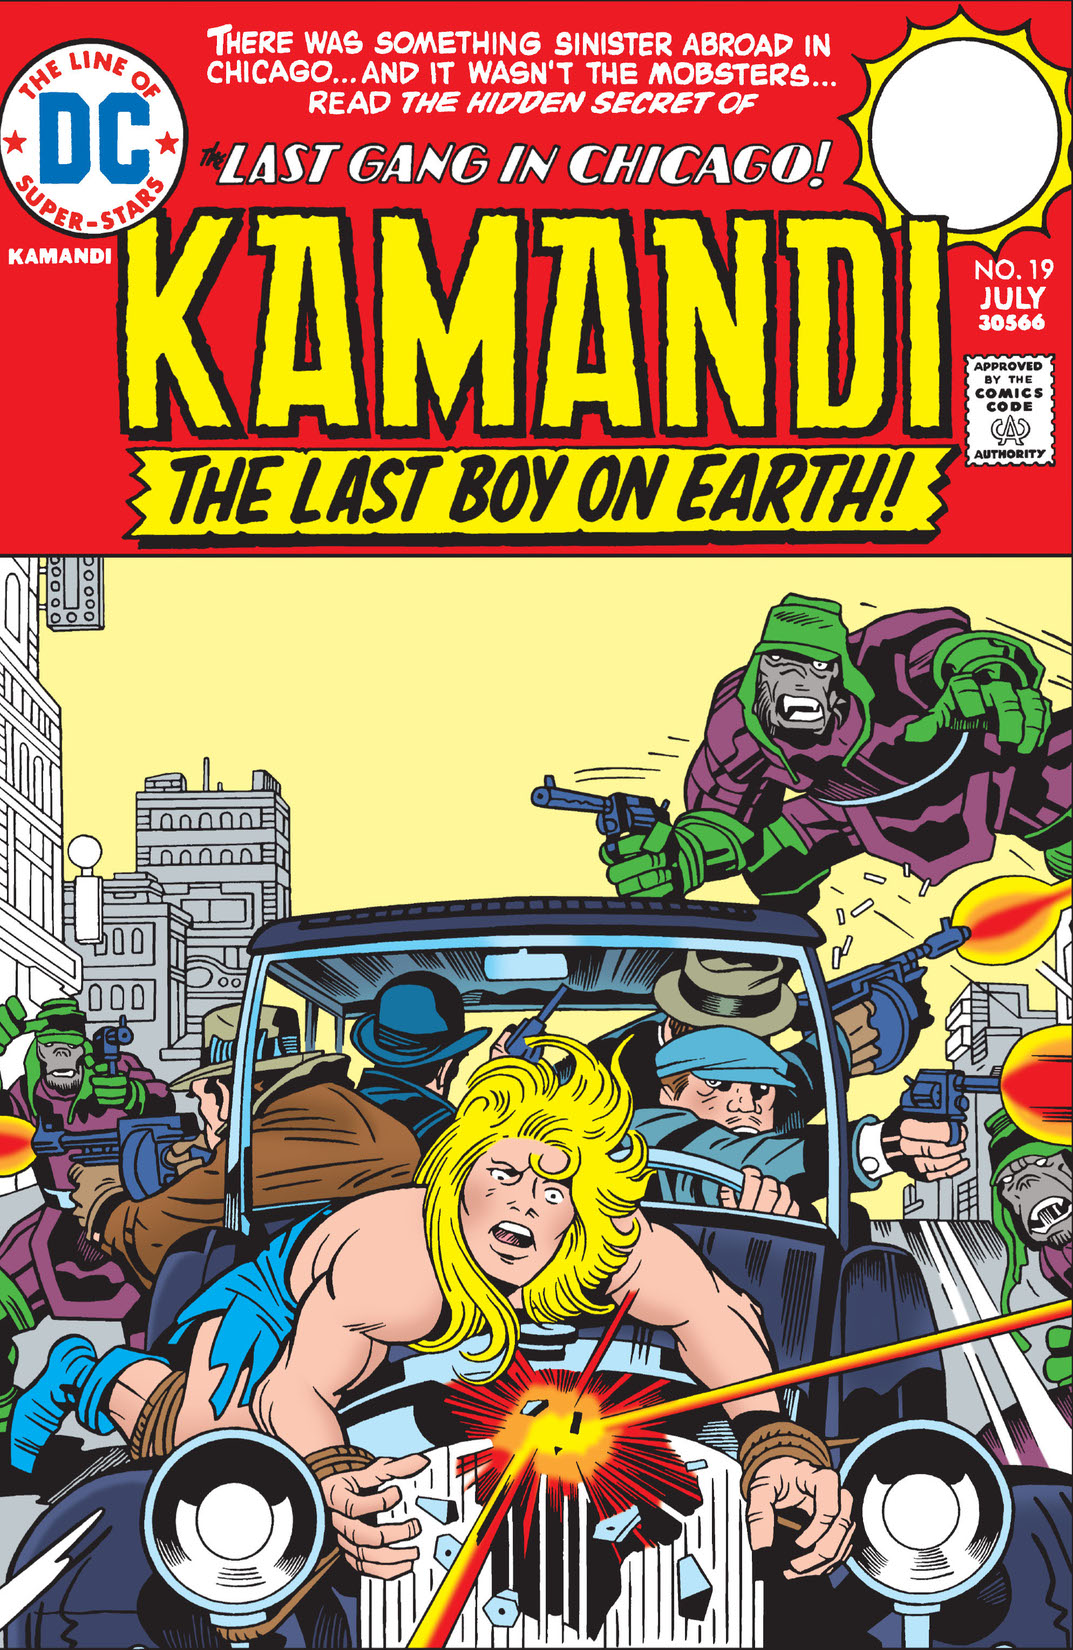 Kamandi: The Last Boy on Earth #19 preview images